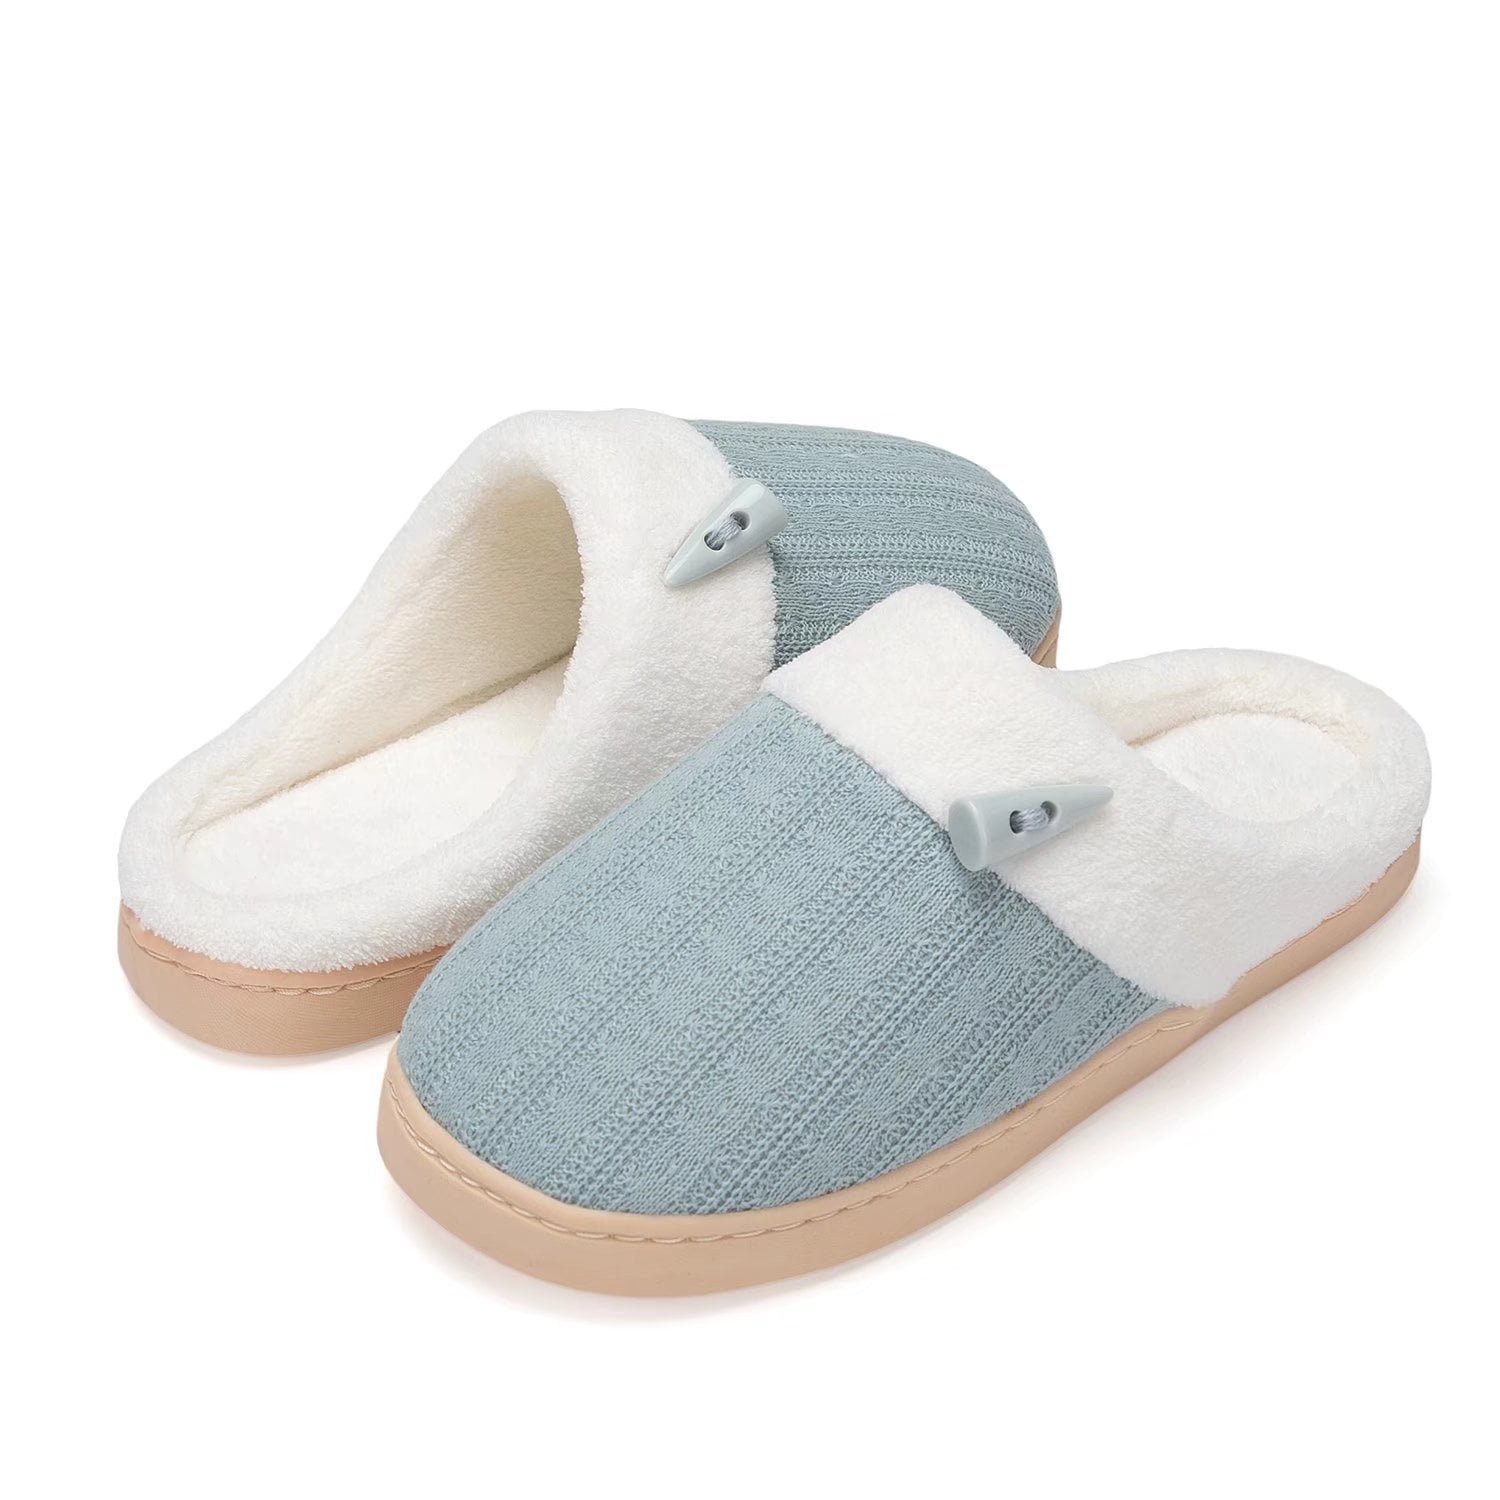 Women Blue and Gray Two Tone Memory Foam Comfy Indoor Outdoor Slippers Size 7-8 